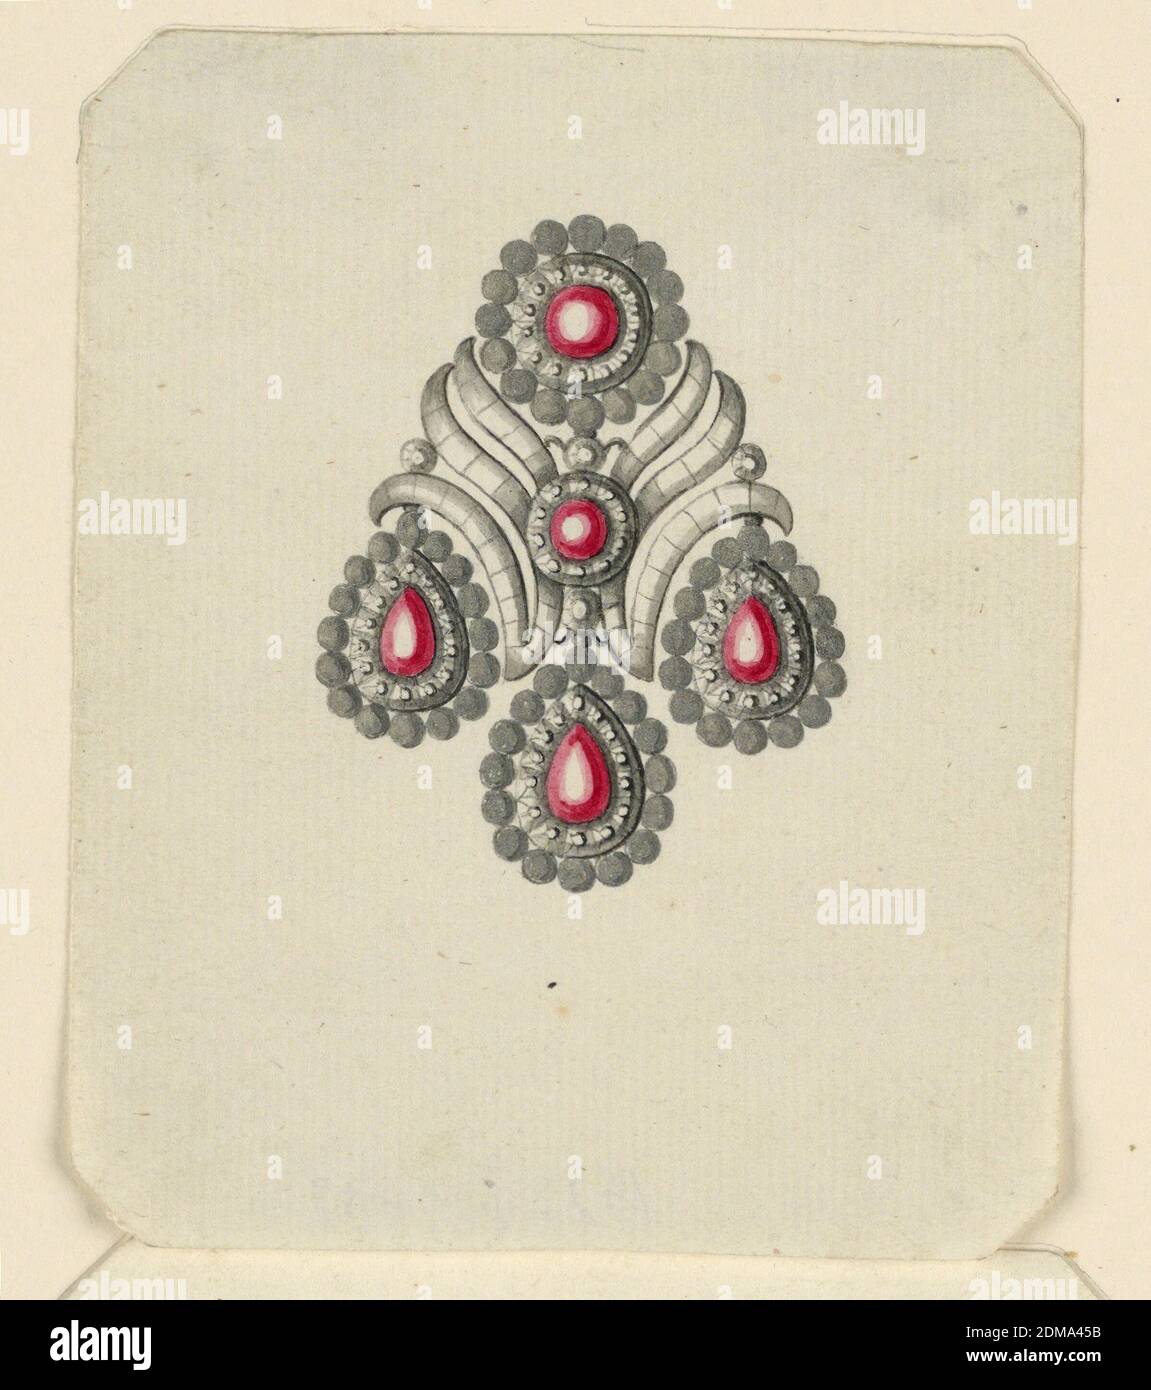 Design for an Earring, Pen and black ink, brush and red, gray watercolor, silver on paper, Jewelry design for an earring. Scheme is similar to 1938-88-842 but with a third leaf as filling the inside of the cornucopiae. The outsides of the frames of the disk and the drops have rows of balls. Bevelled corners., probably Naples, South Italy, Italy, late 18th century, jewelry, Drawing Stock Photo